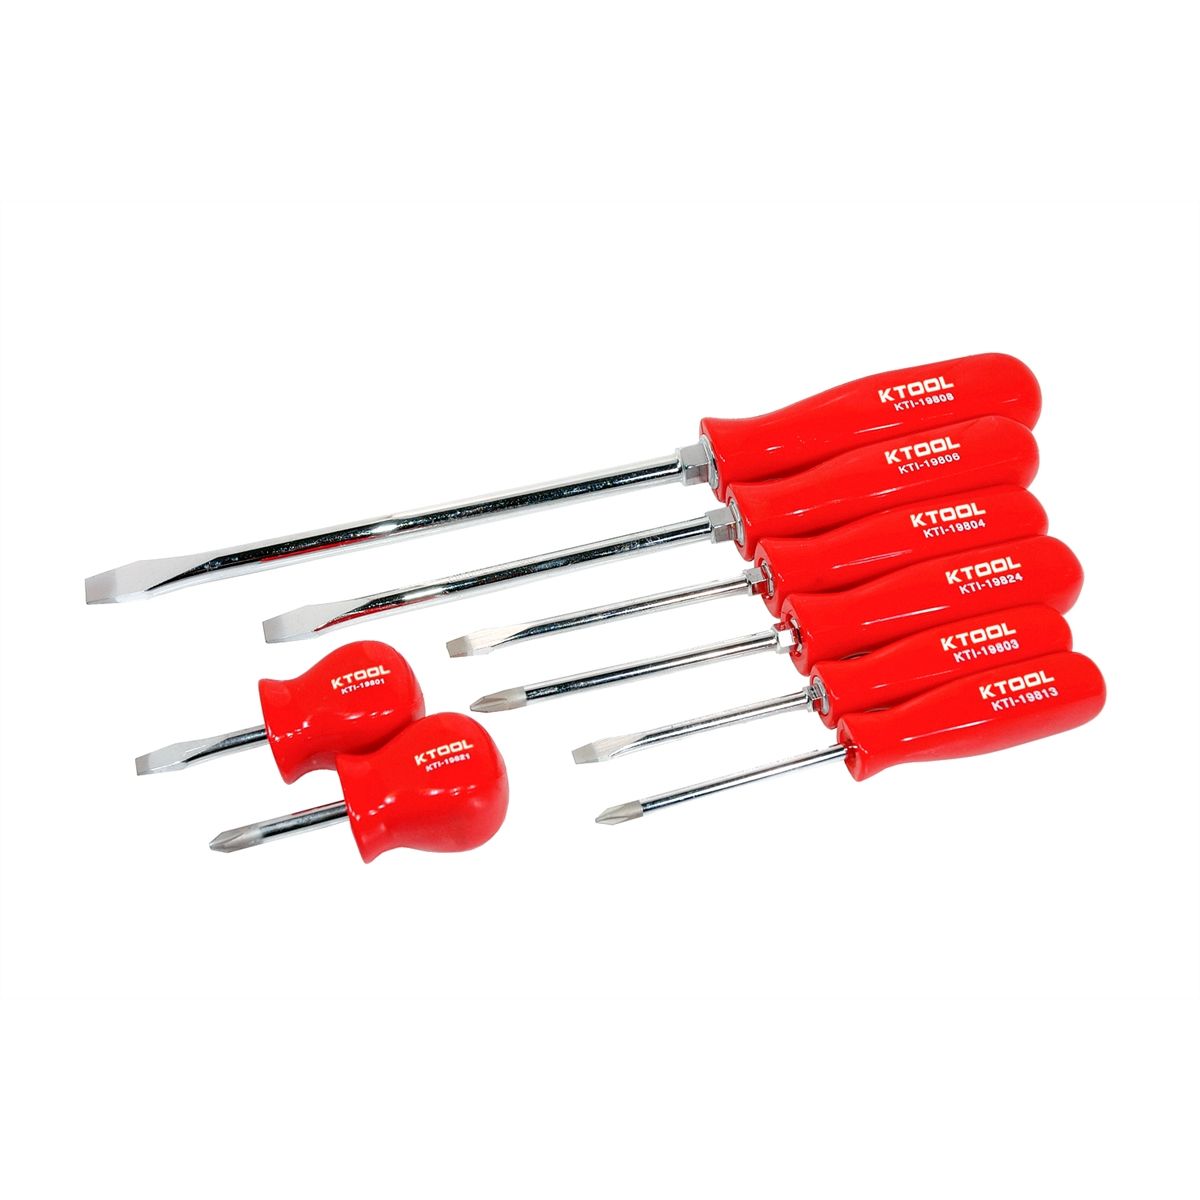 8 Piece Phillips and Slotted Screwdriver Set with Red Handles